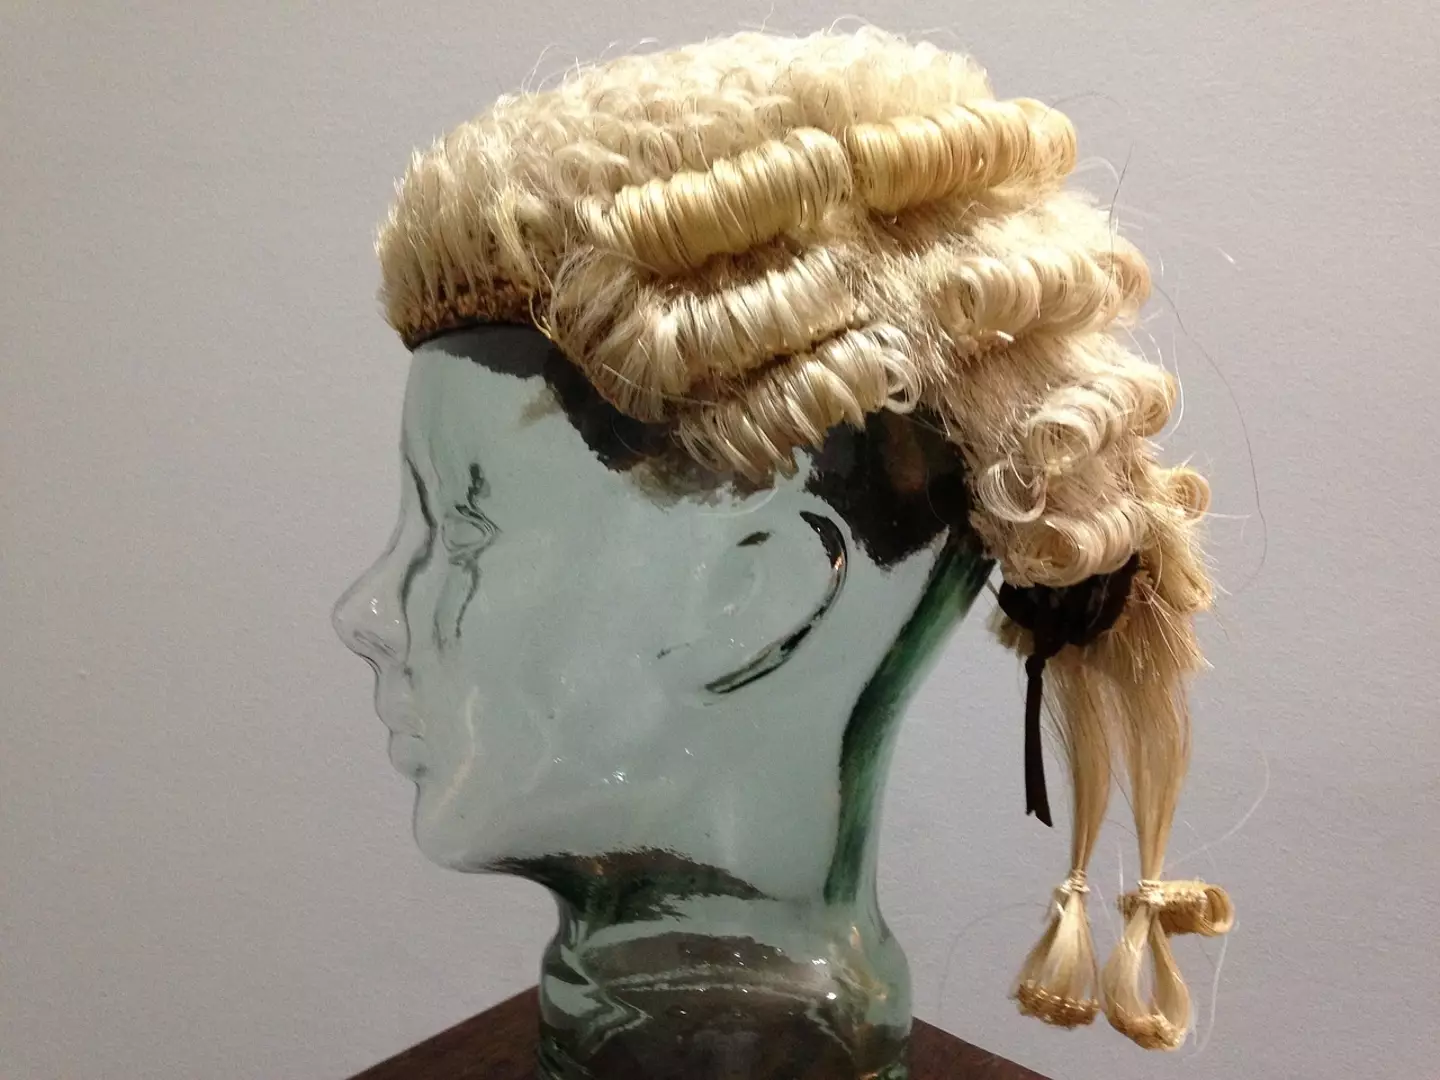 Wigs were introduced in the 17th century.